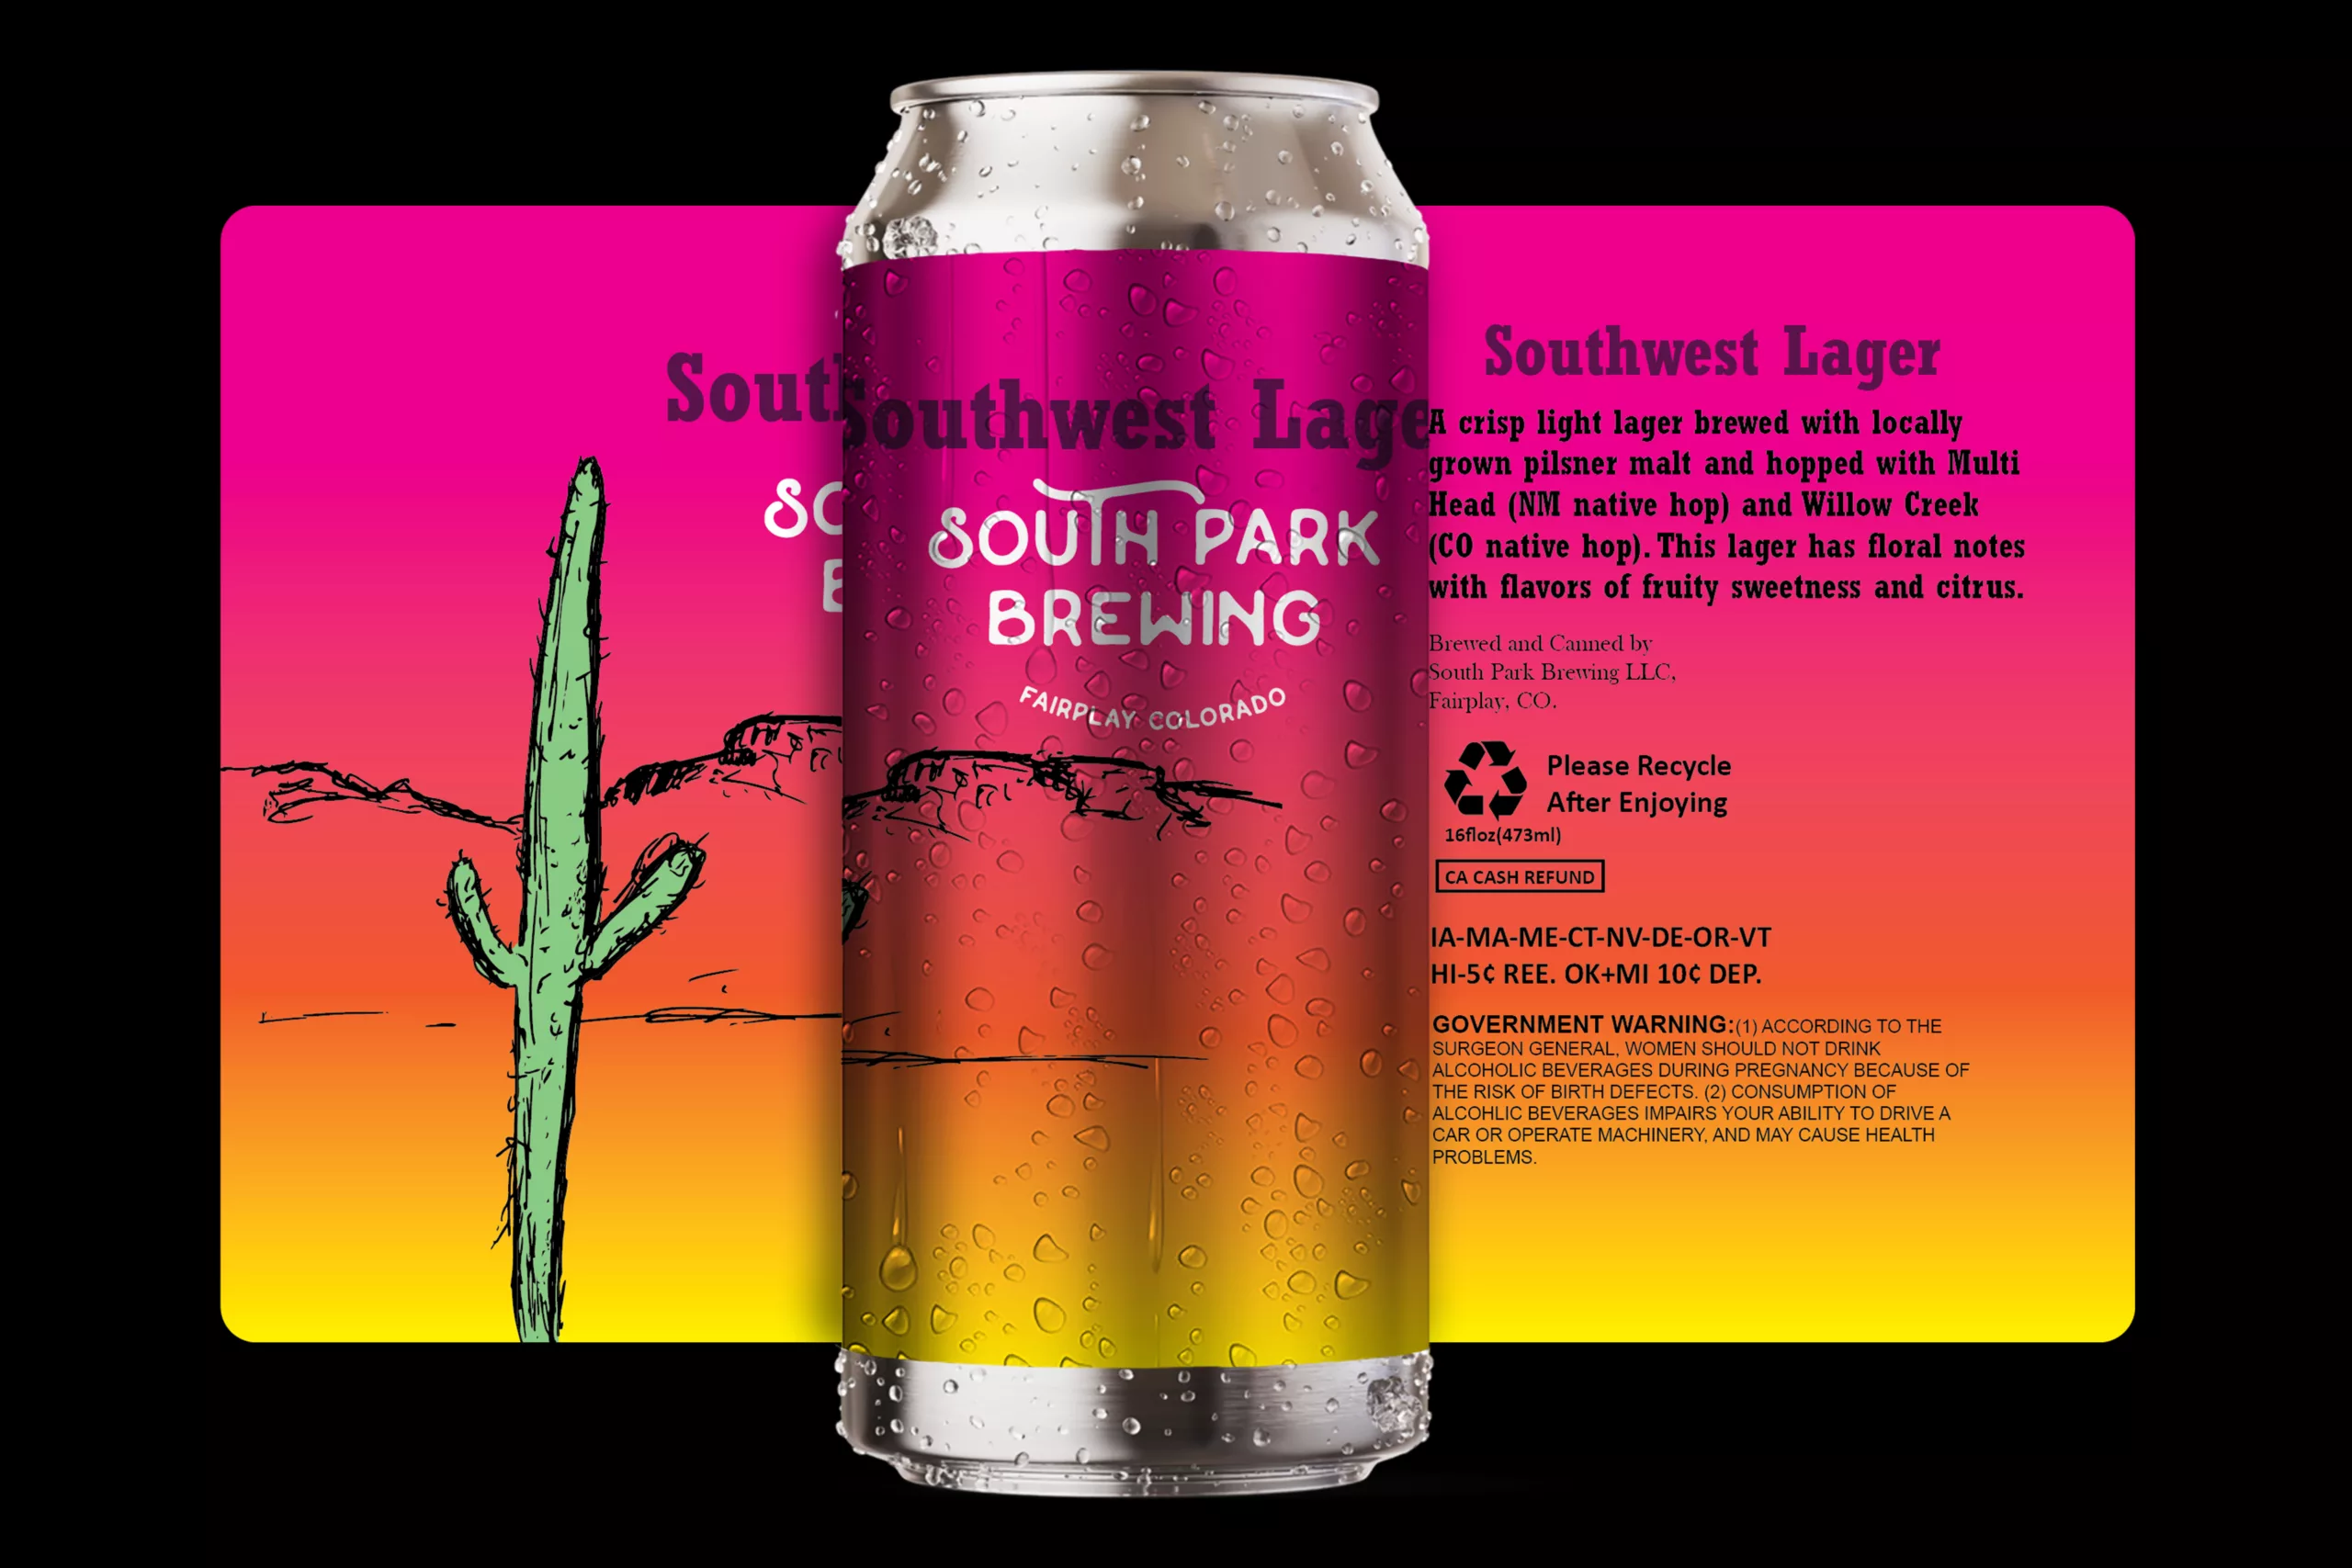 South West Lager